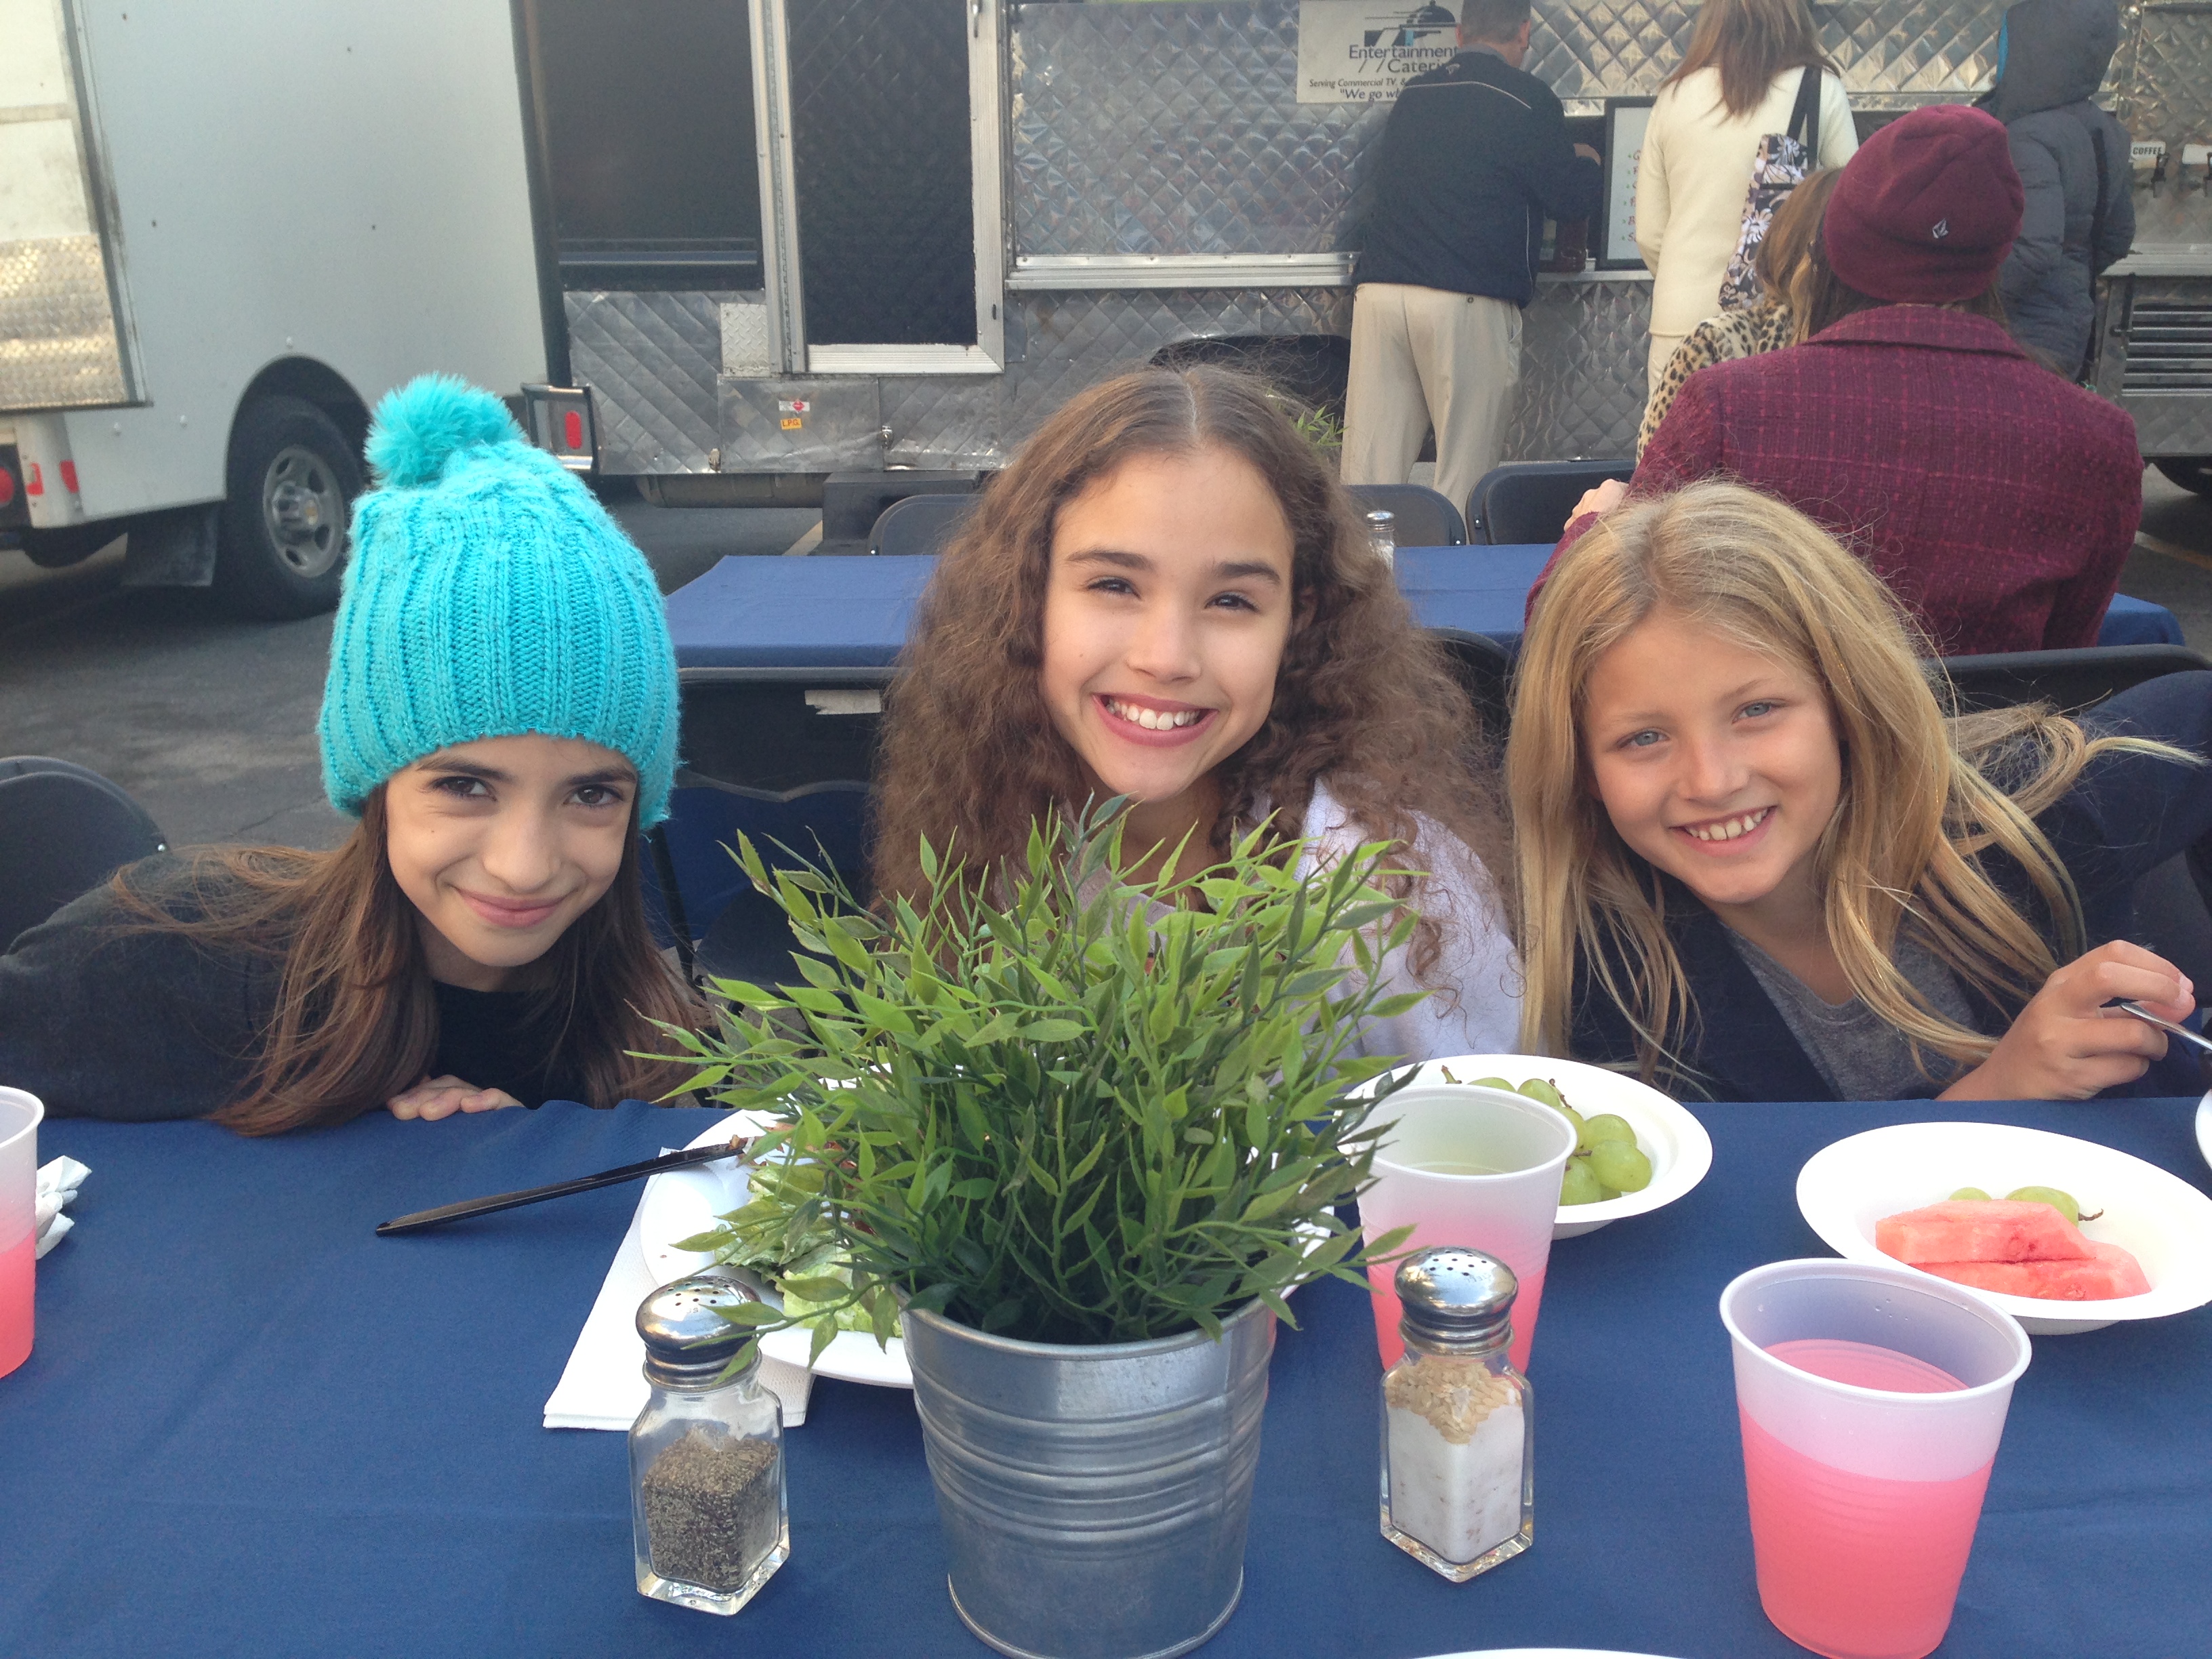 Actresses (L to R) Soni Bringas, Gracie Haschak, and Ryan Baumann break for lunch while starring in the AMERICAN GIRL - Isabelle, Girl of the Year 2014 doll commercial (Dec. 2013).